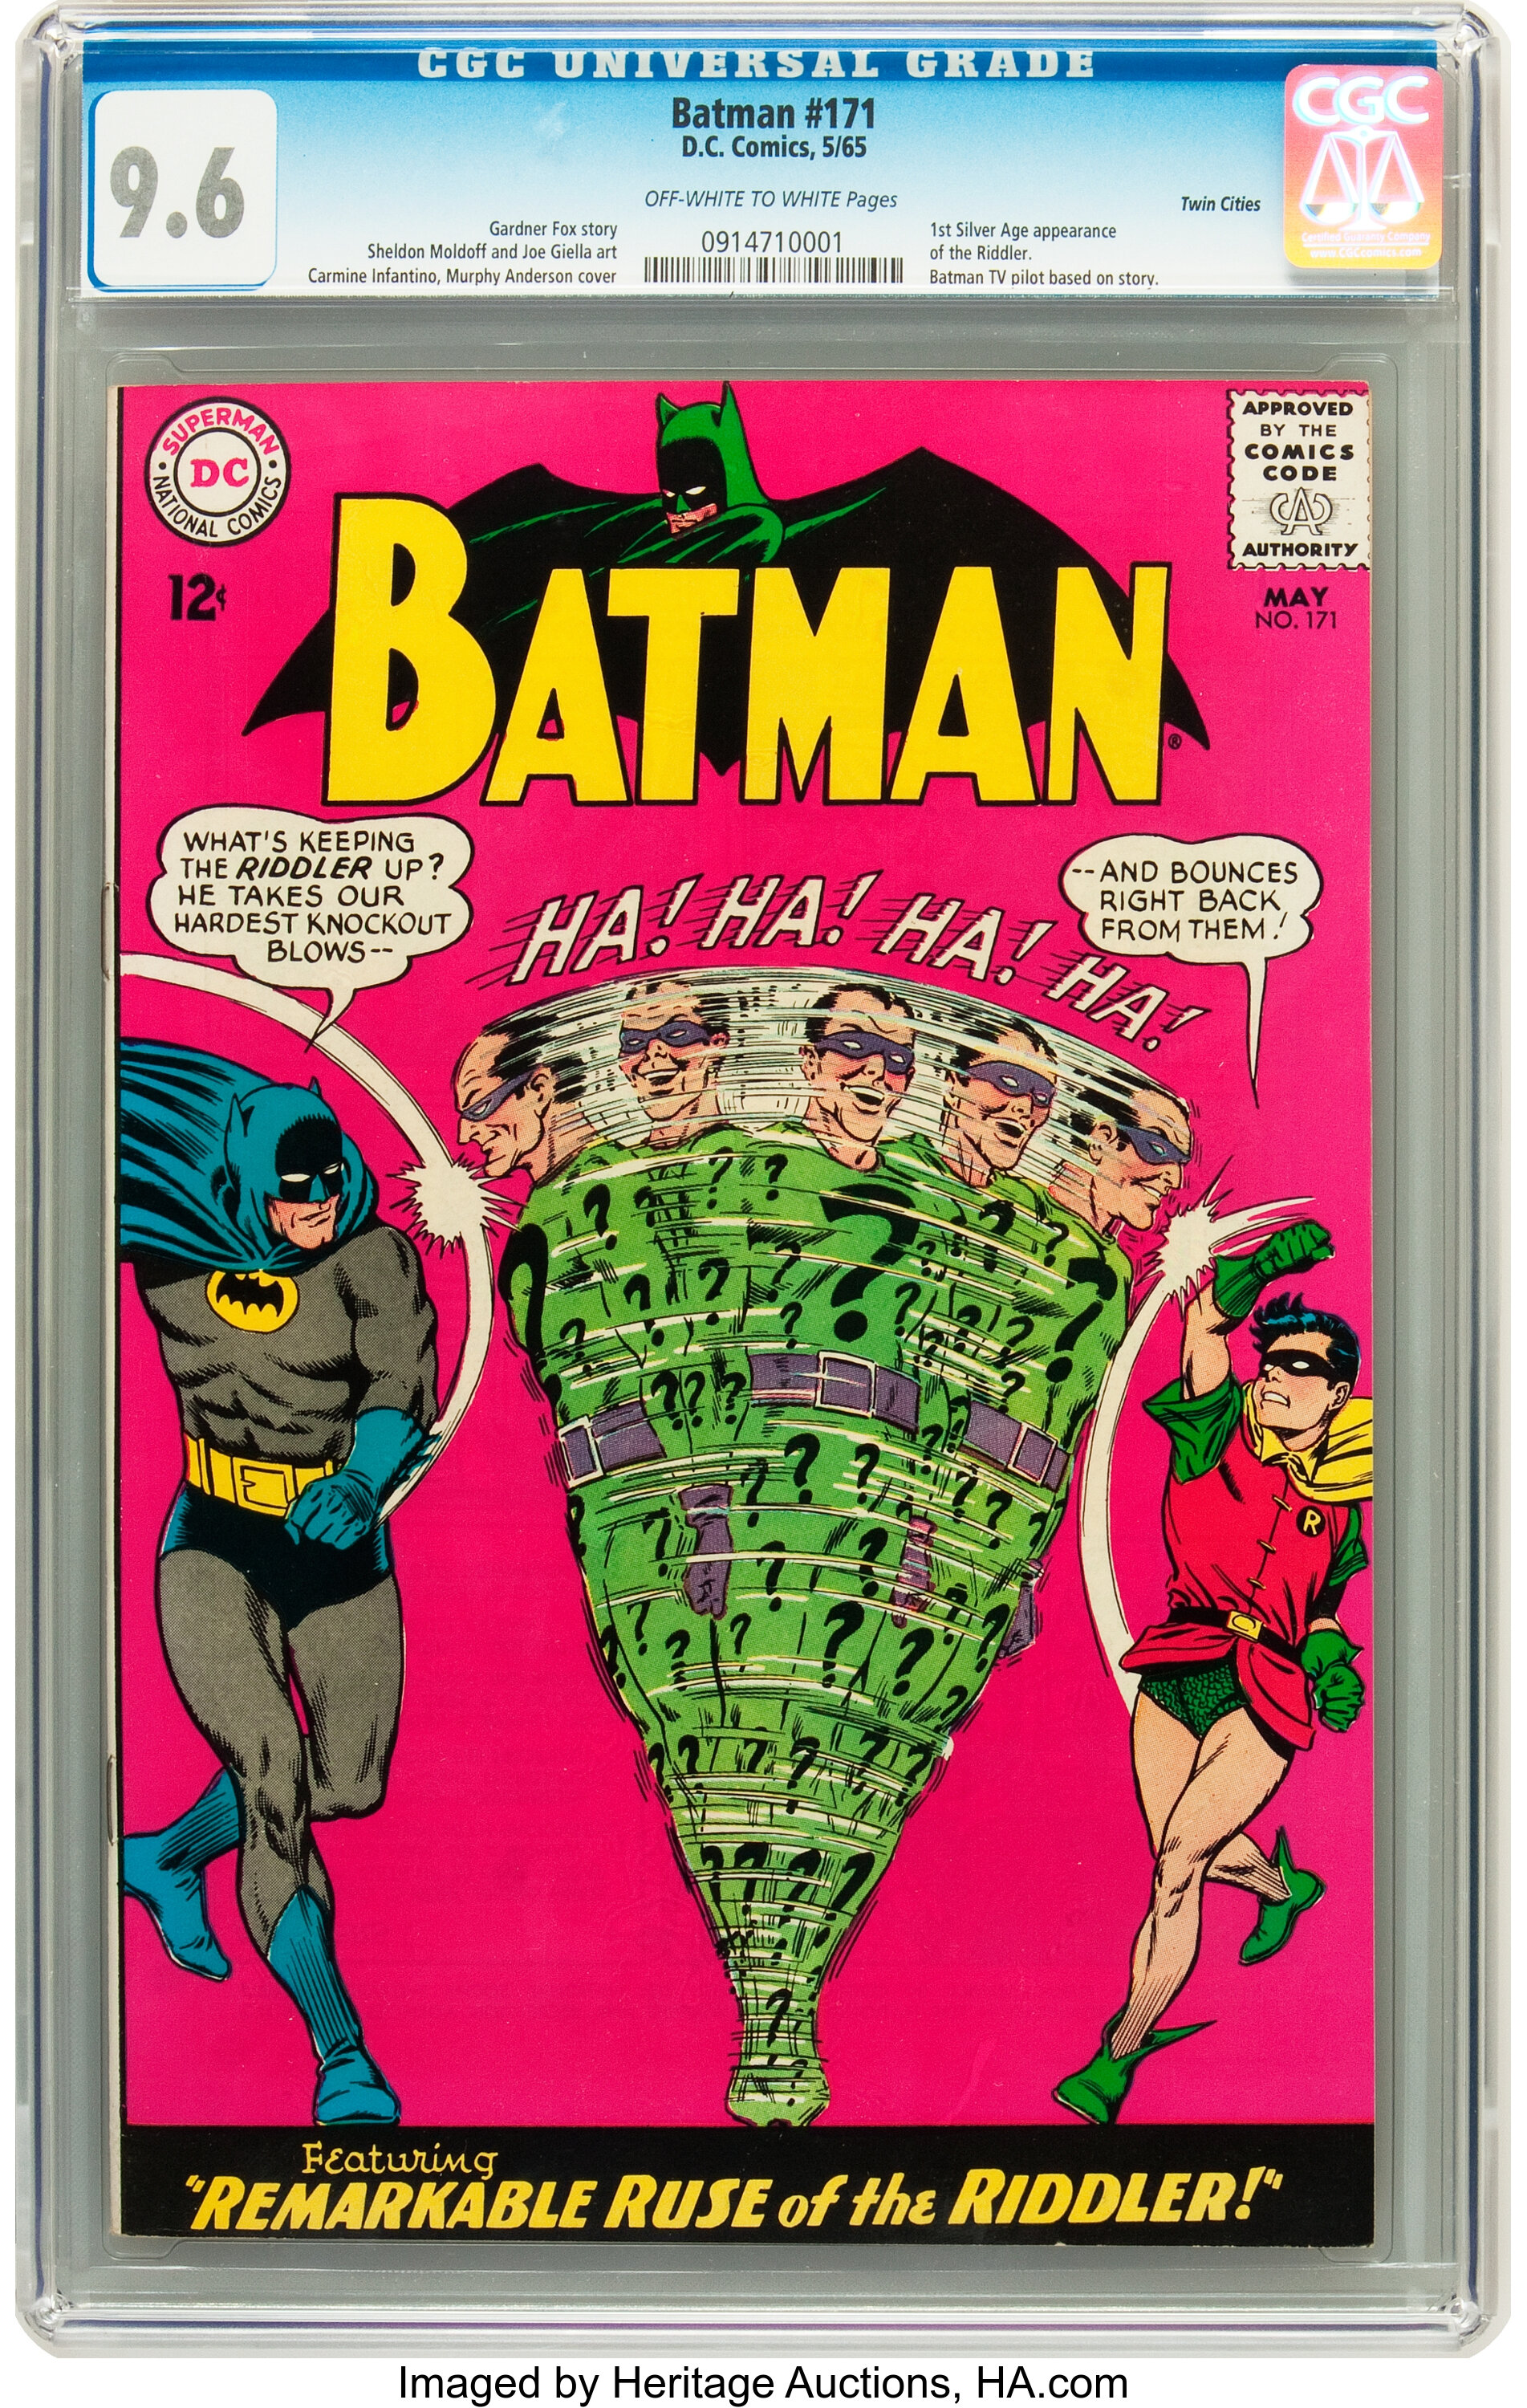 How Much Is Batman #171 Worth? Browse Comic Prices | Heritage Auctions